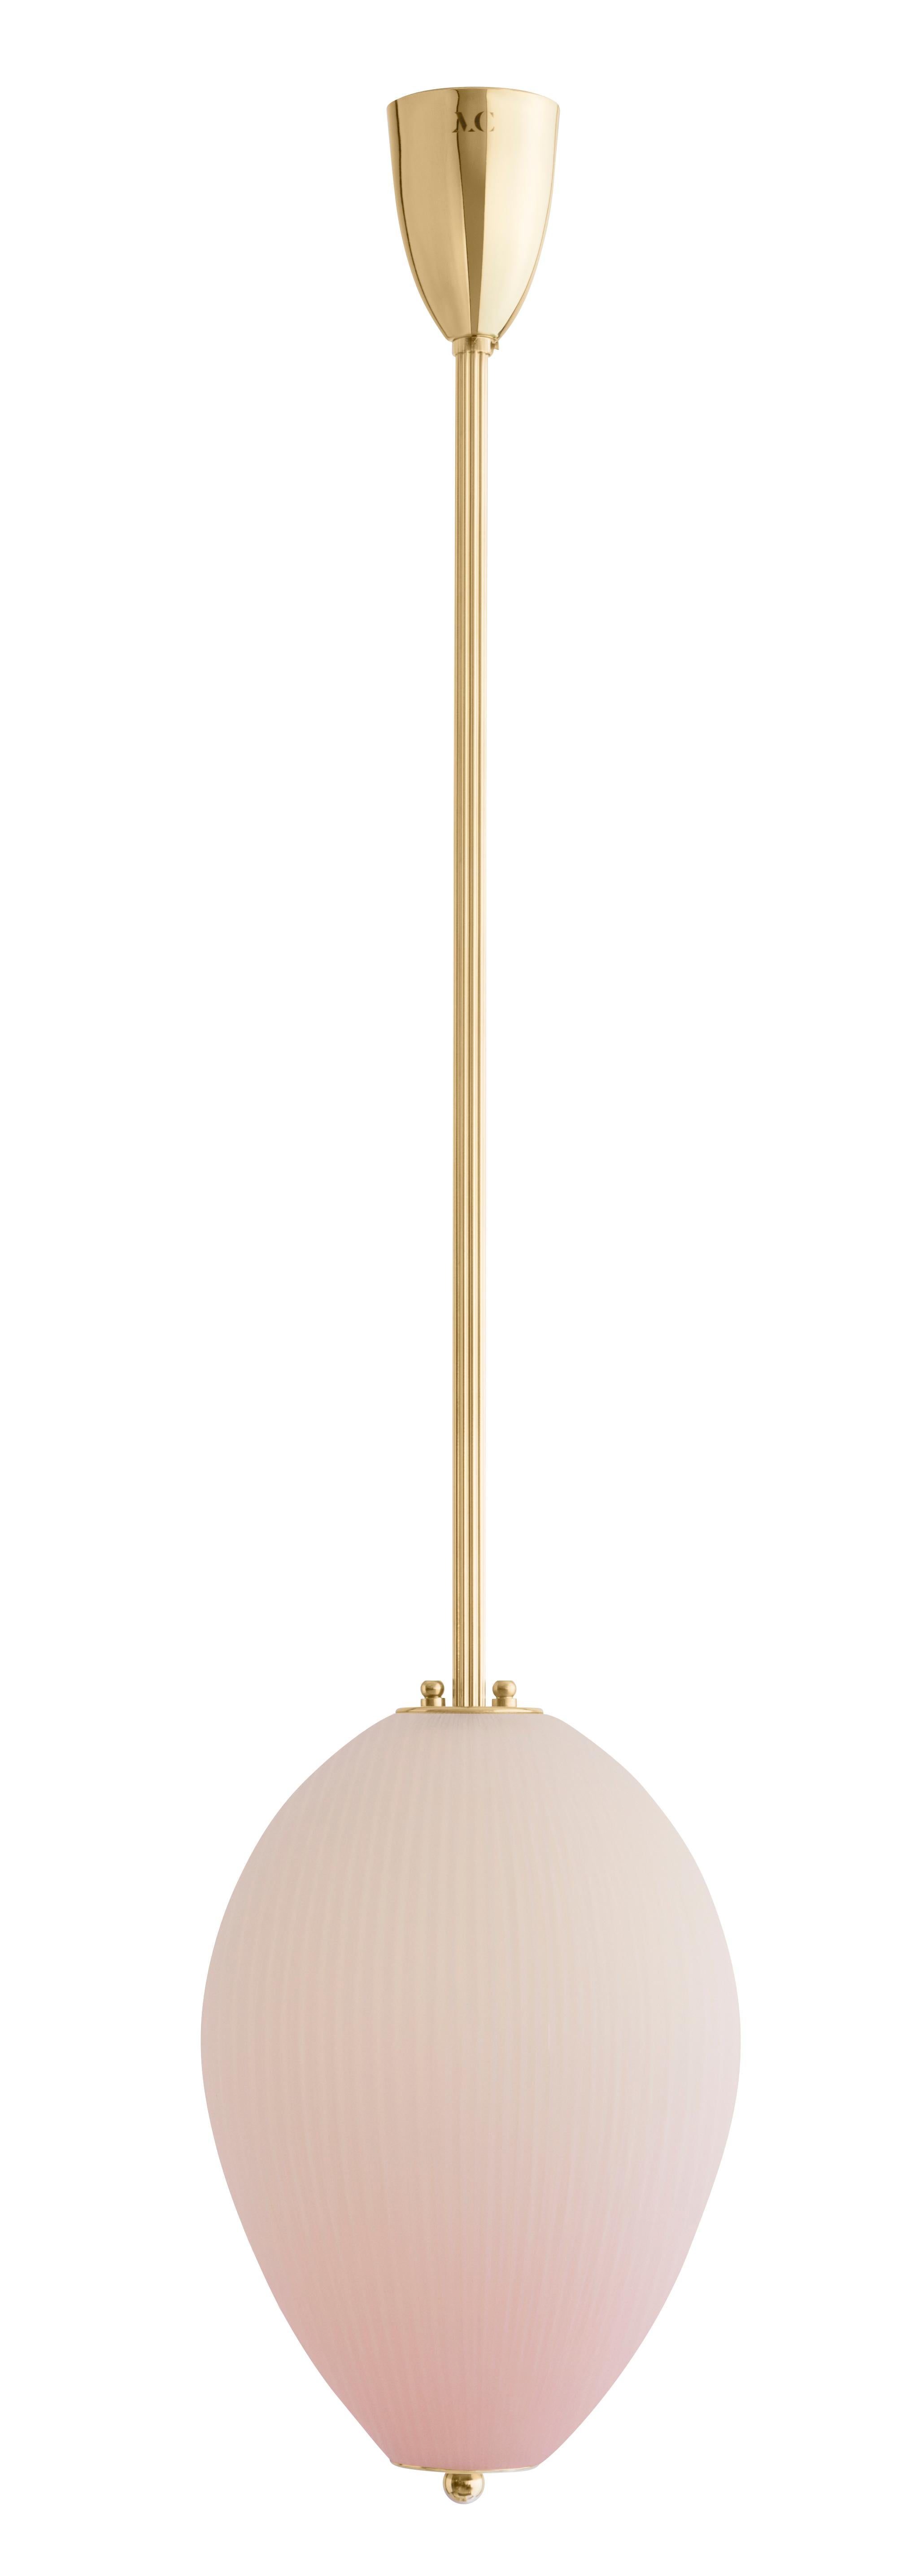 Pendant China 10 by Magic Circus Editions
Dimensions: H 90 x W 32 x D 32 cm, also available in H 110, 130, 150, 175, 190 cm
Materials: Brass, mouth blown glass sculpted with a diamond saw
Colour: Soft rose

Available finishes: Brass,